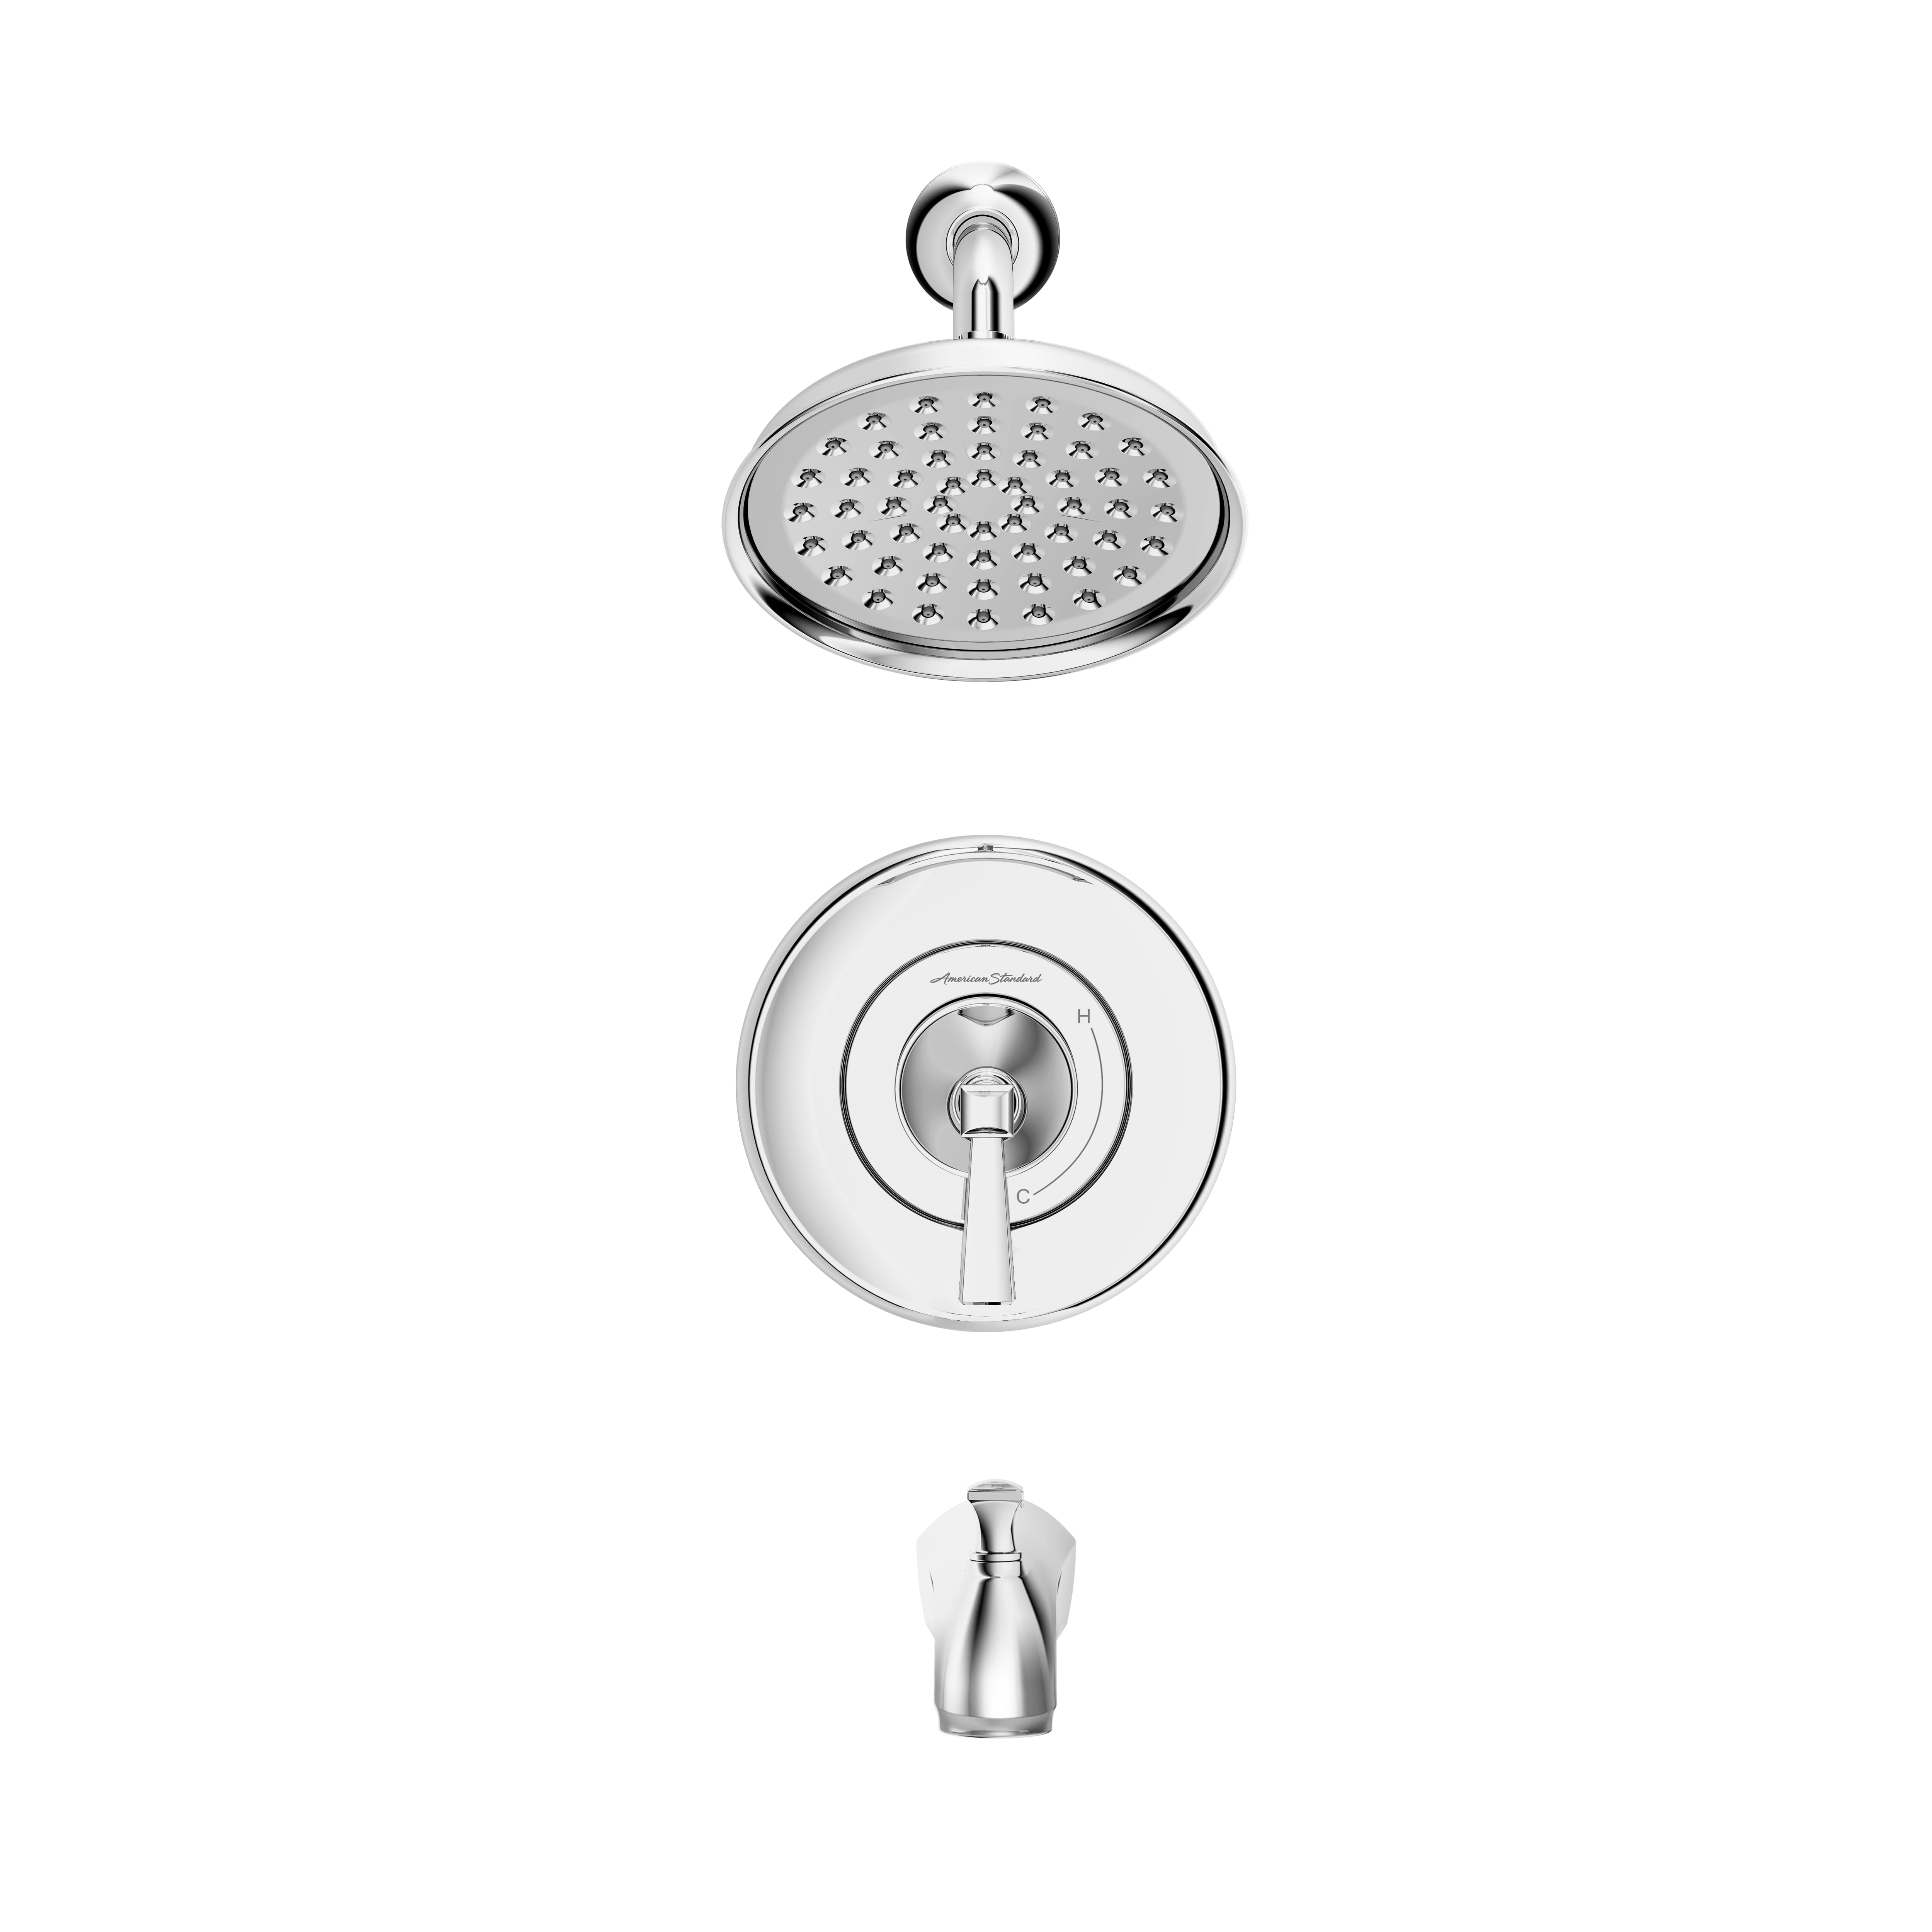 Rumson Tub and Shower Trim Kit with Valve POLISHED CHROME